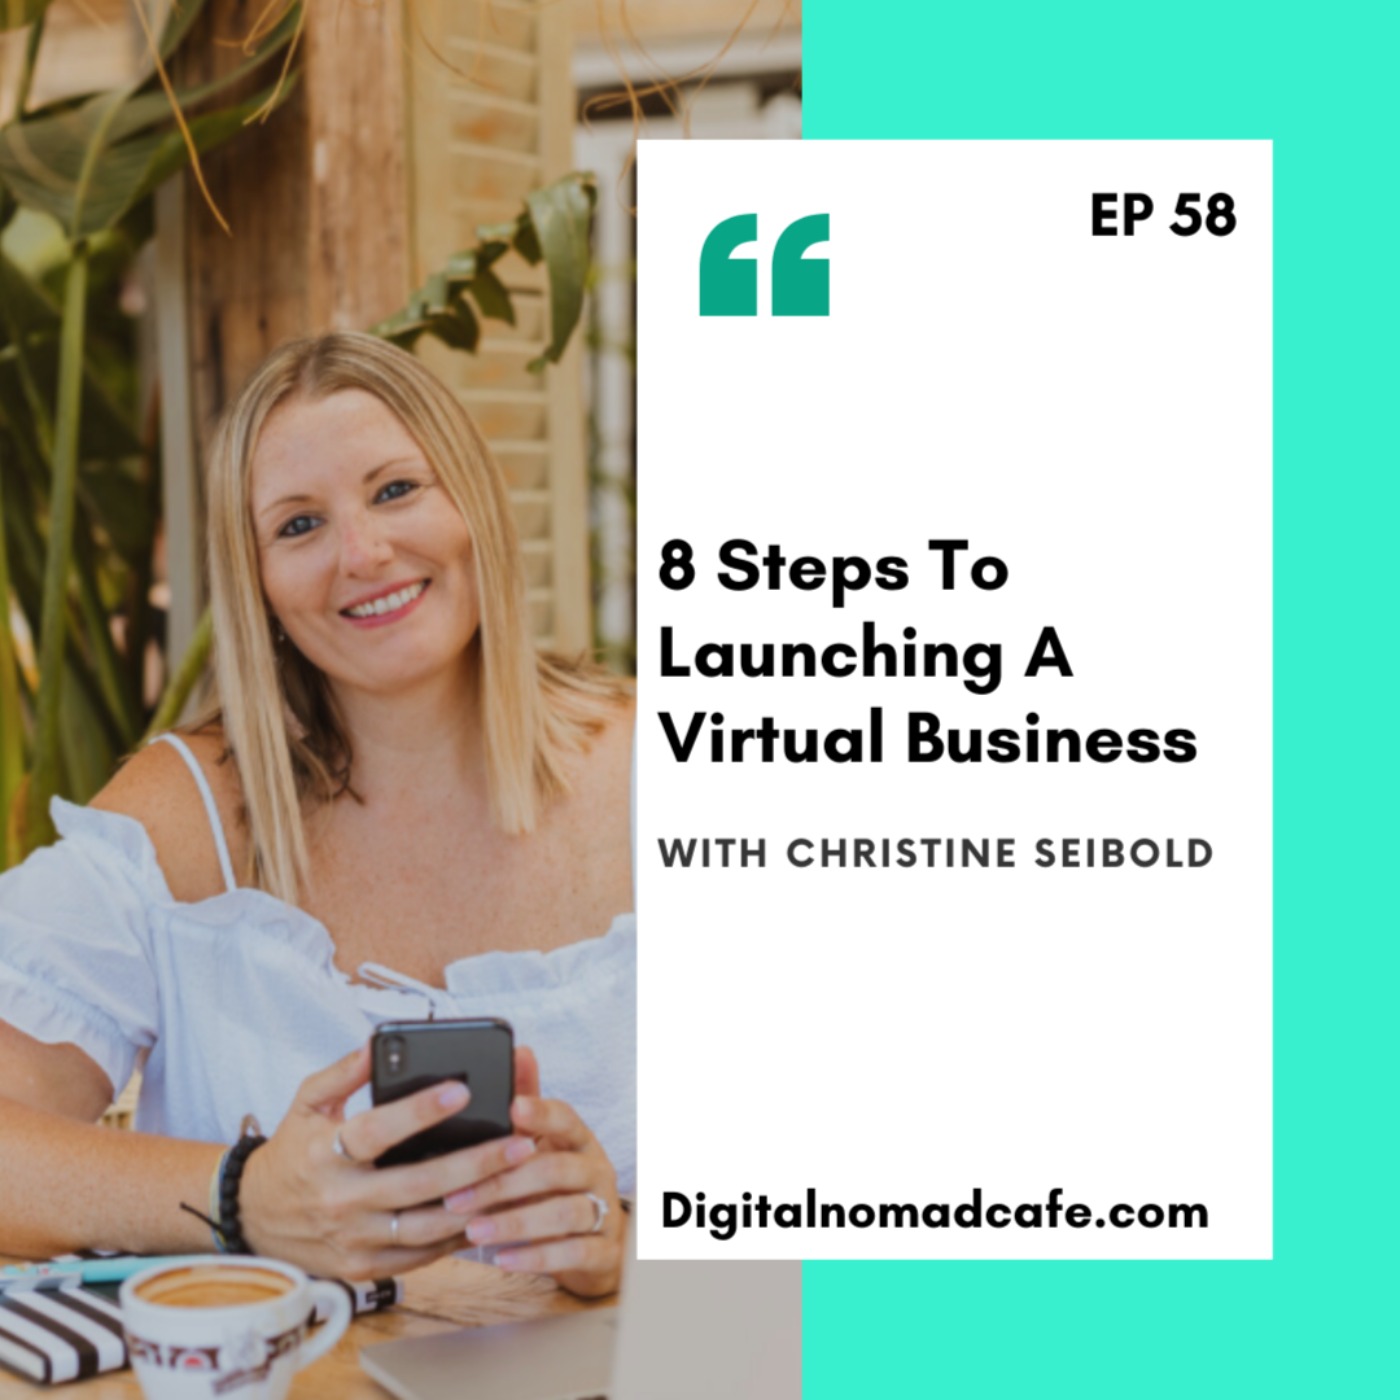 EP58: 8 Steps To Launching A Virtual Business With Christine Seibold